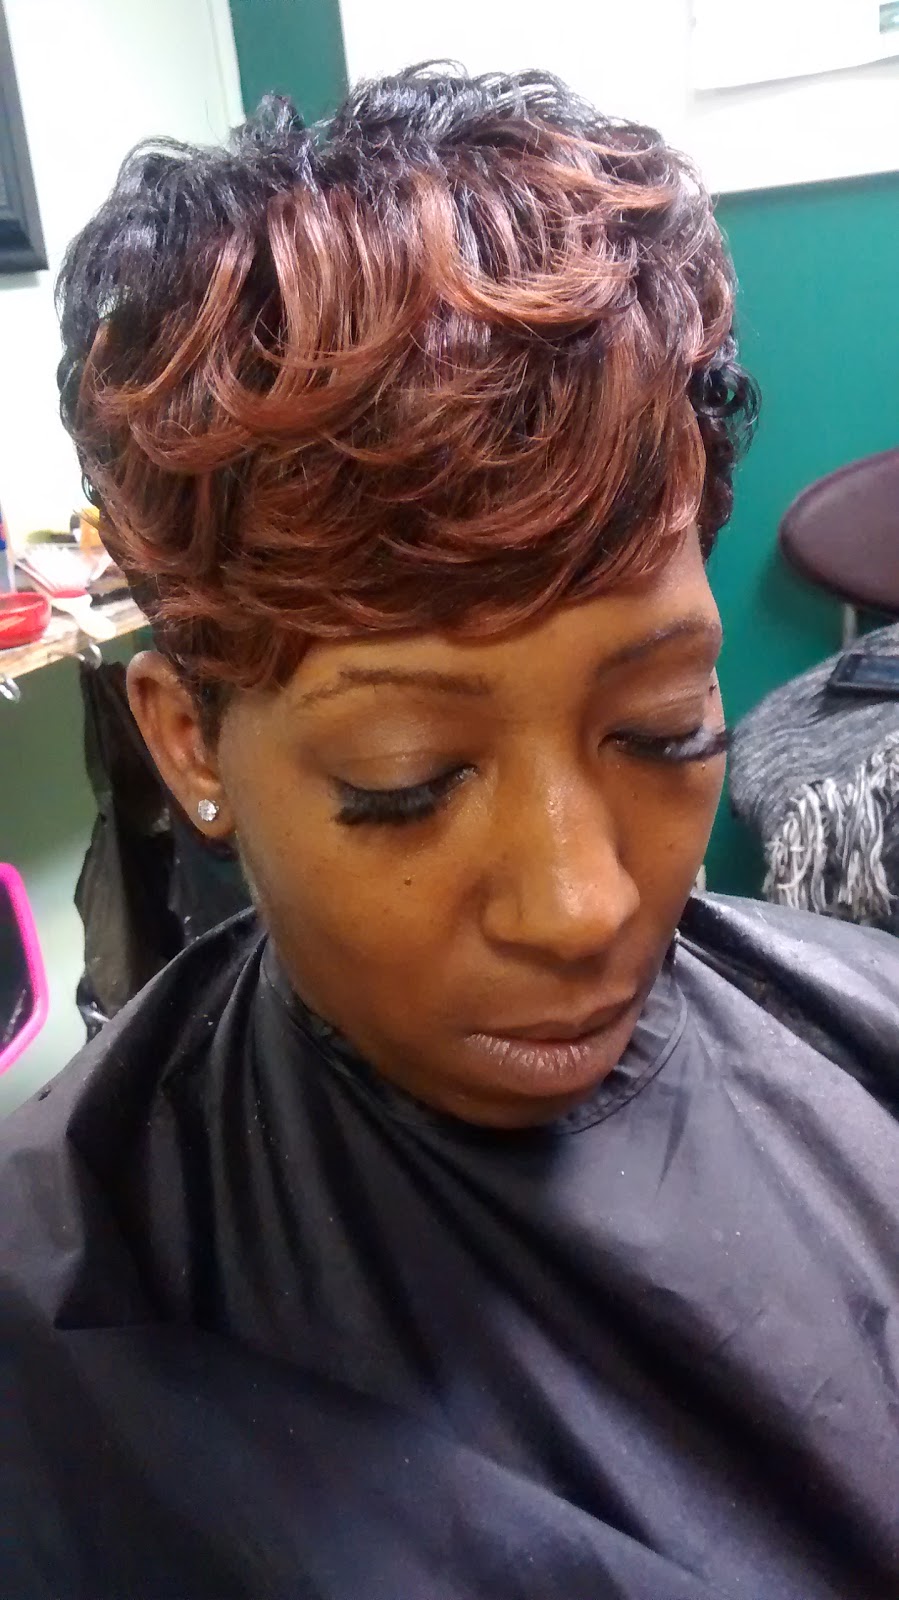 Hair Connections | 2938 N 22nd St, Philadelphia, PA 19132 | Phone: (215) 228-3397